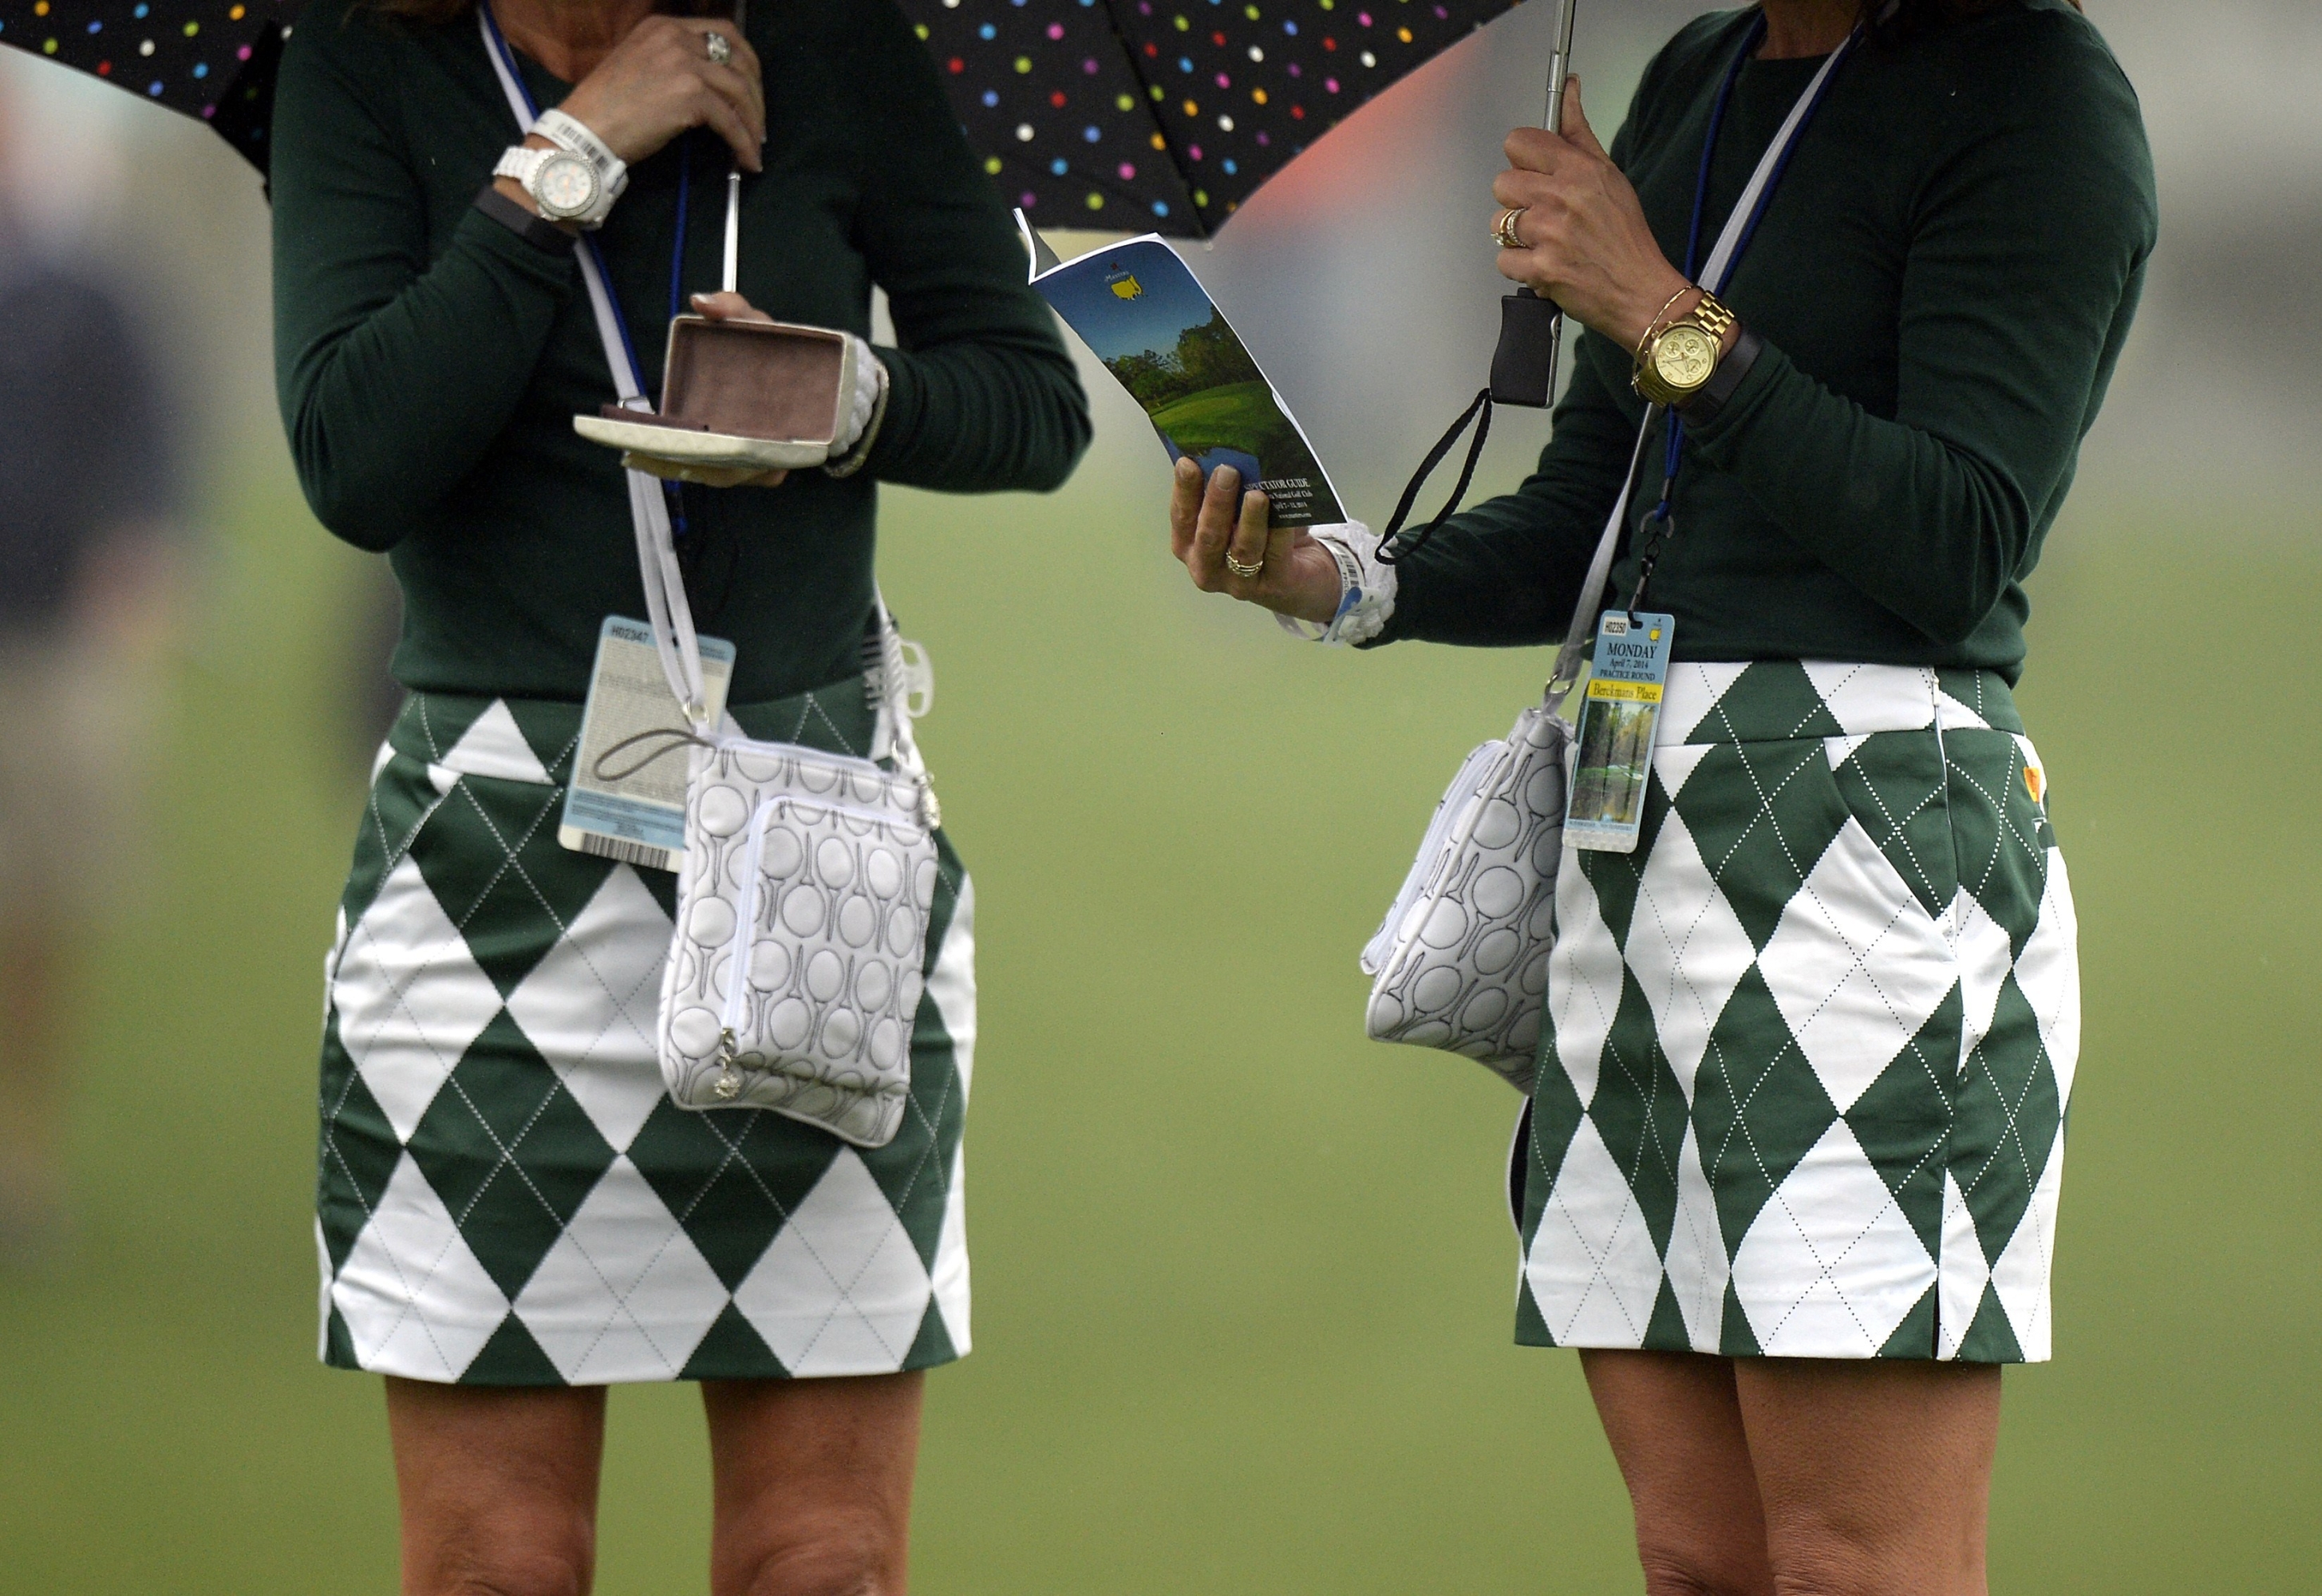 Golf fans in matching outfits watch a practice round April 7, 2014 at Augusta National Golf Club in Augusta, Georgia ahead of the start of the 2014 Masters Golf Tournament.    AFP PHOTO / Timothy A. CLARY        (Photo credit should read TIMOTHY A. CLARY/AFP via Getty Images)